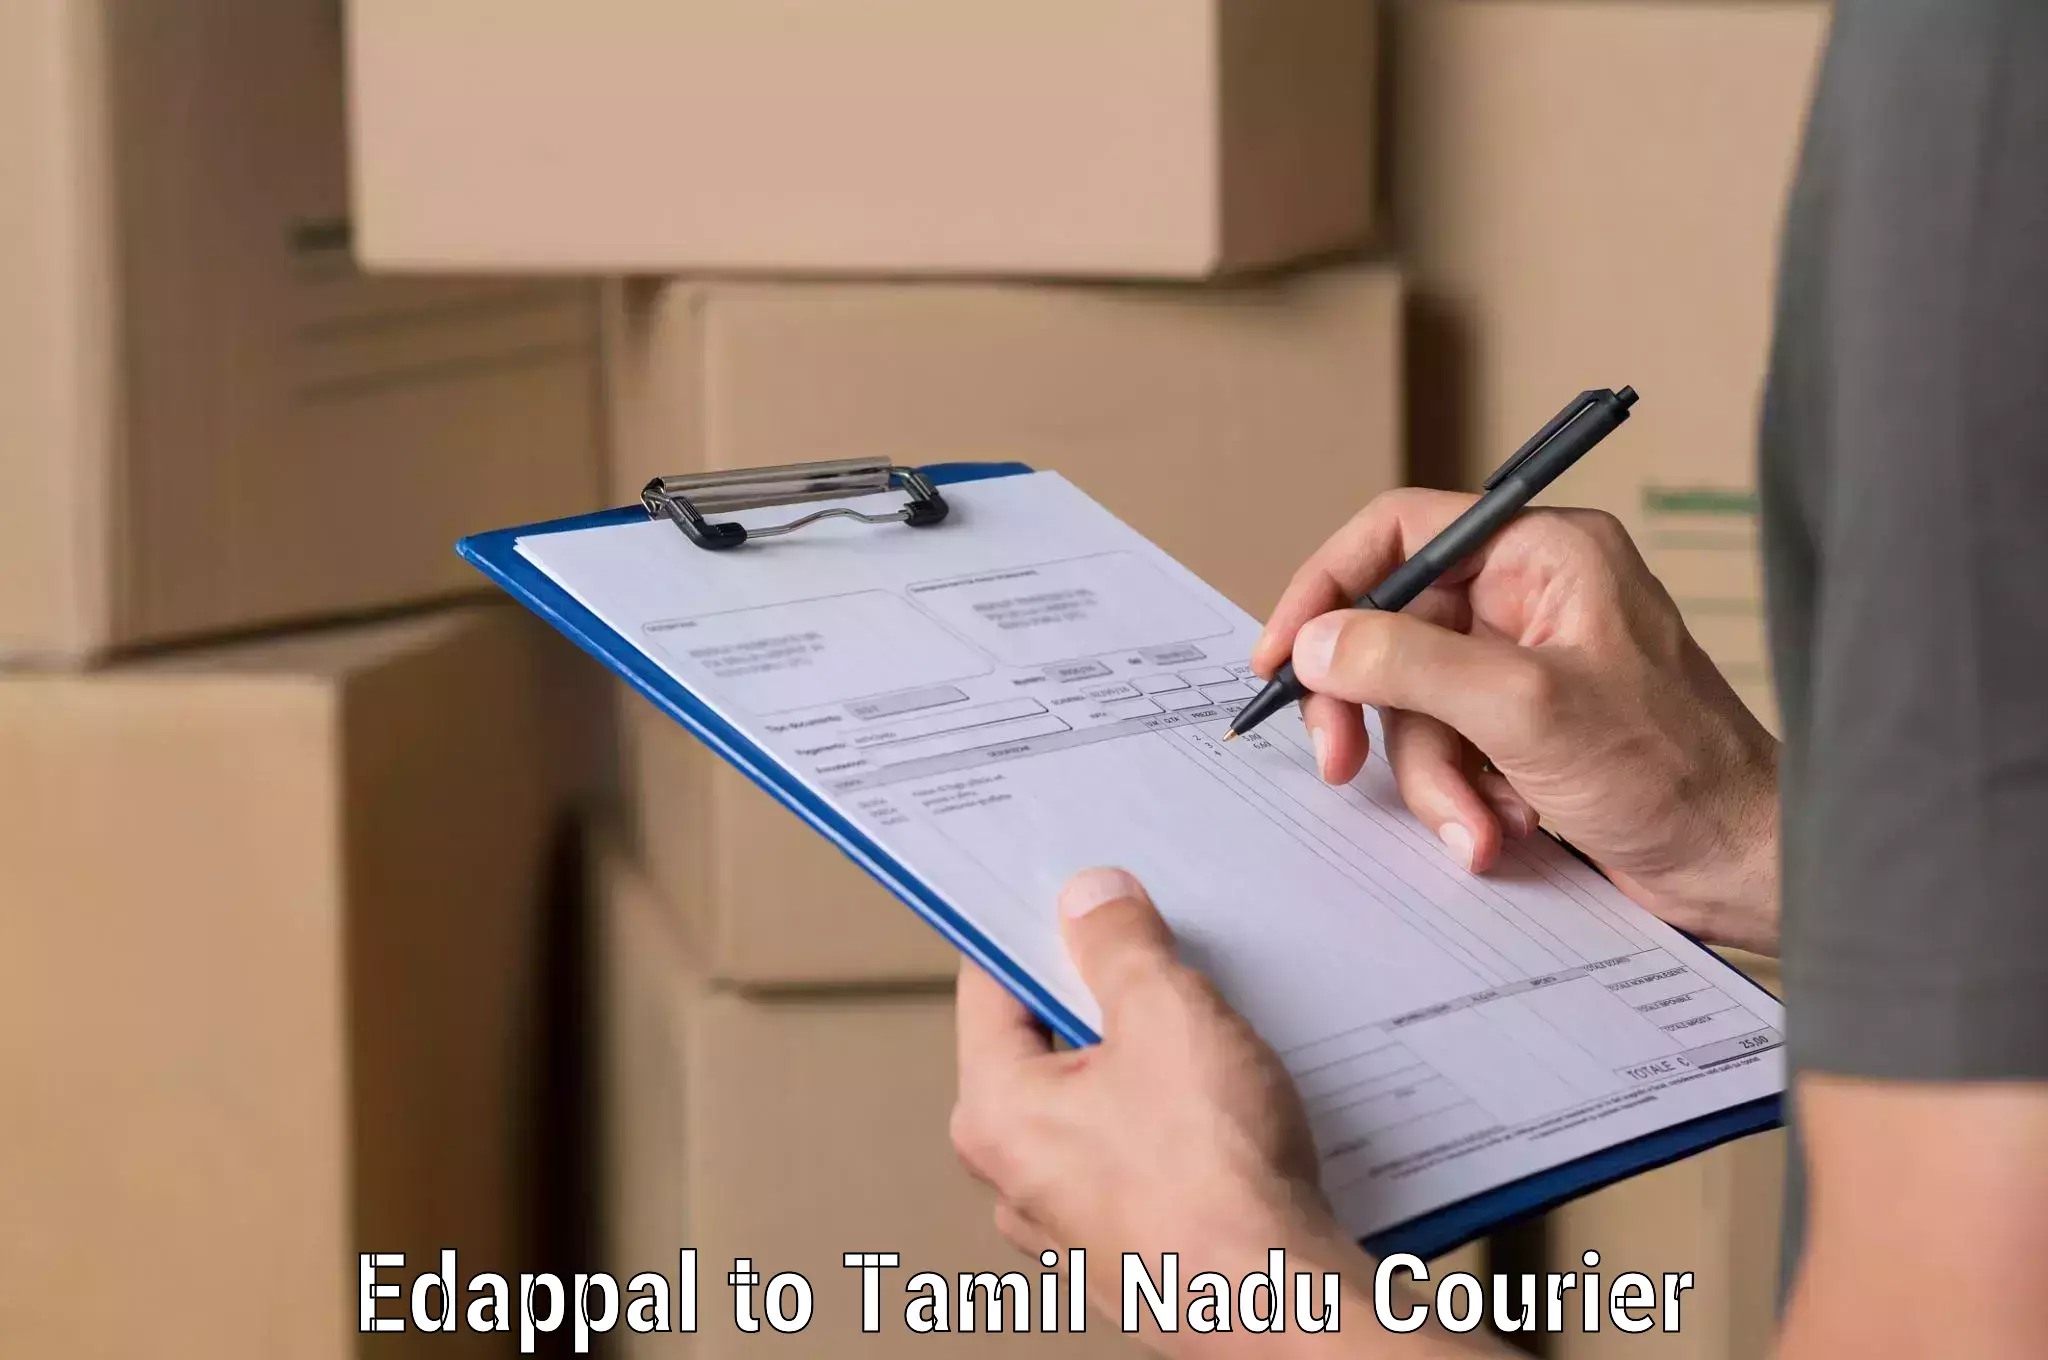 Efficient freight service Edappal to Coonoor